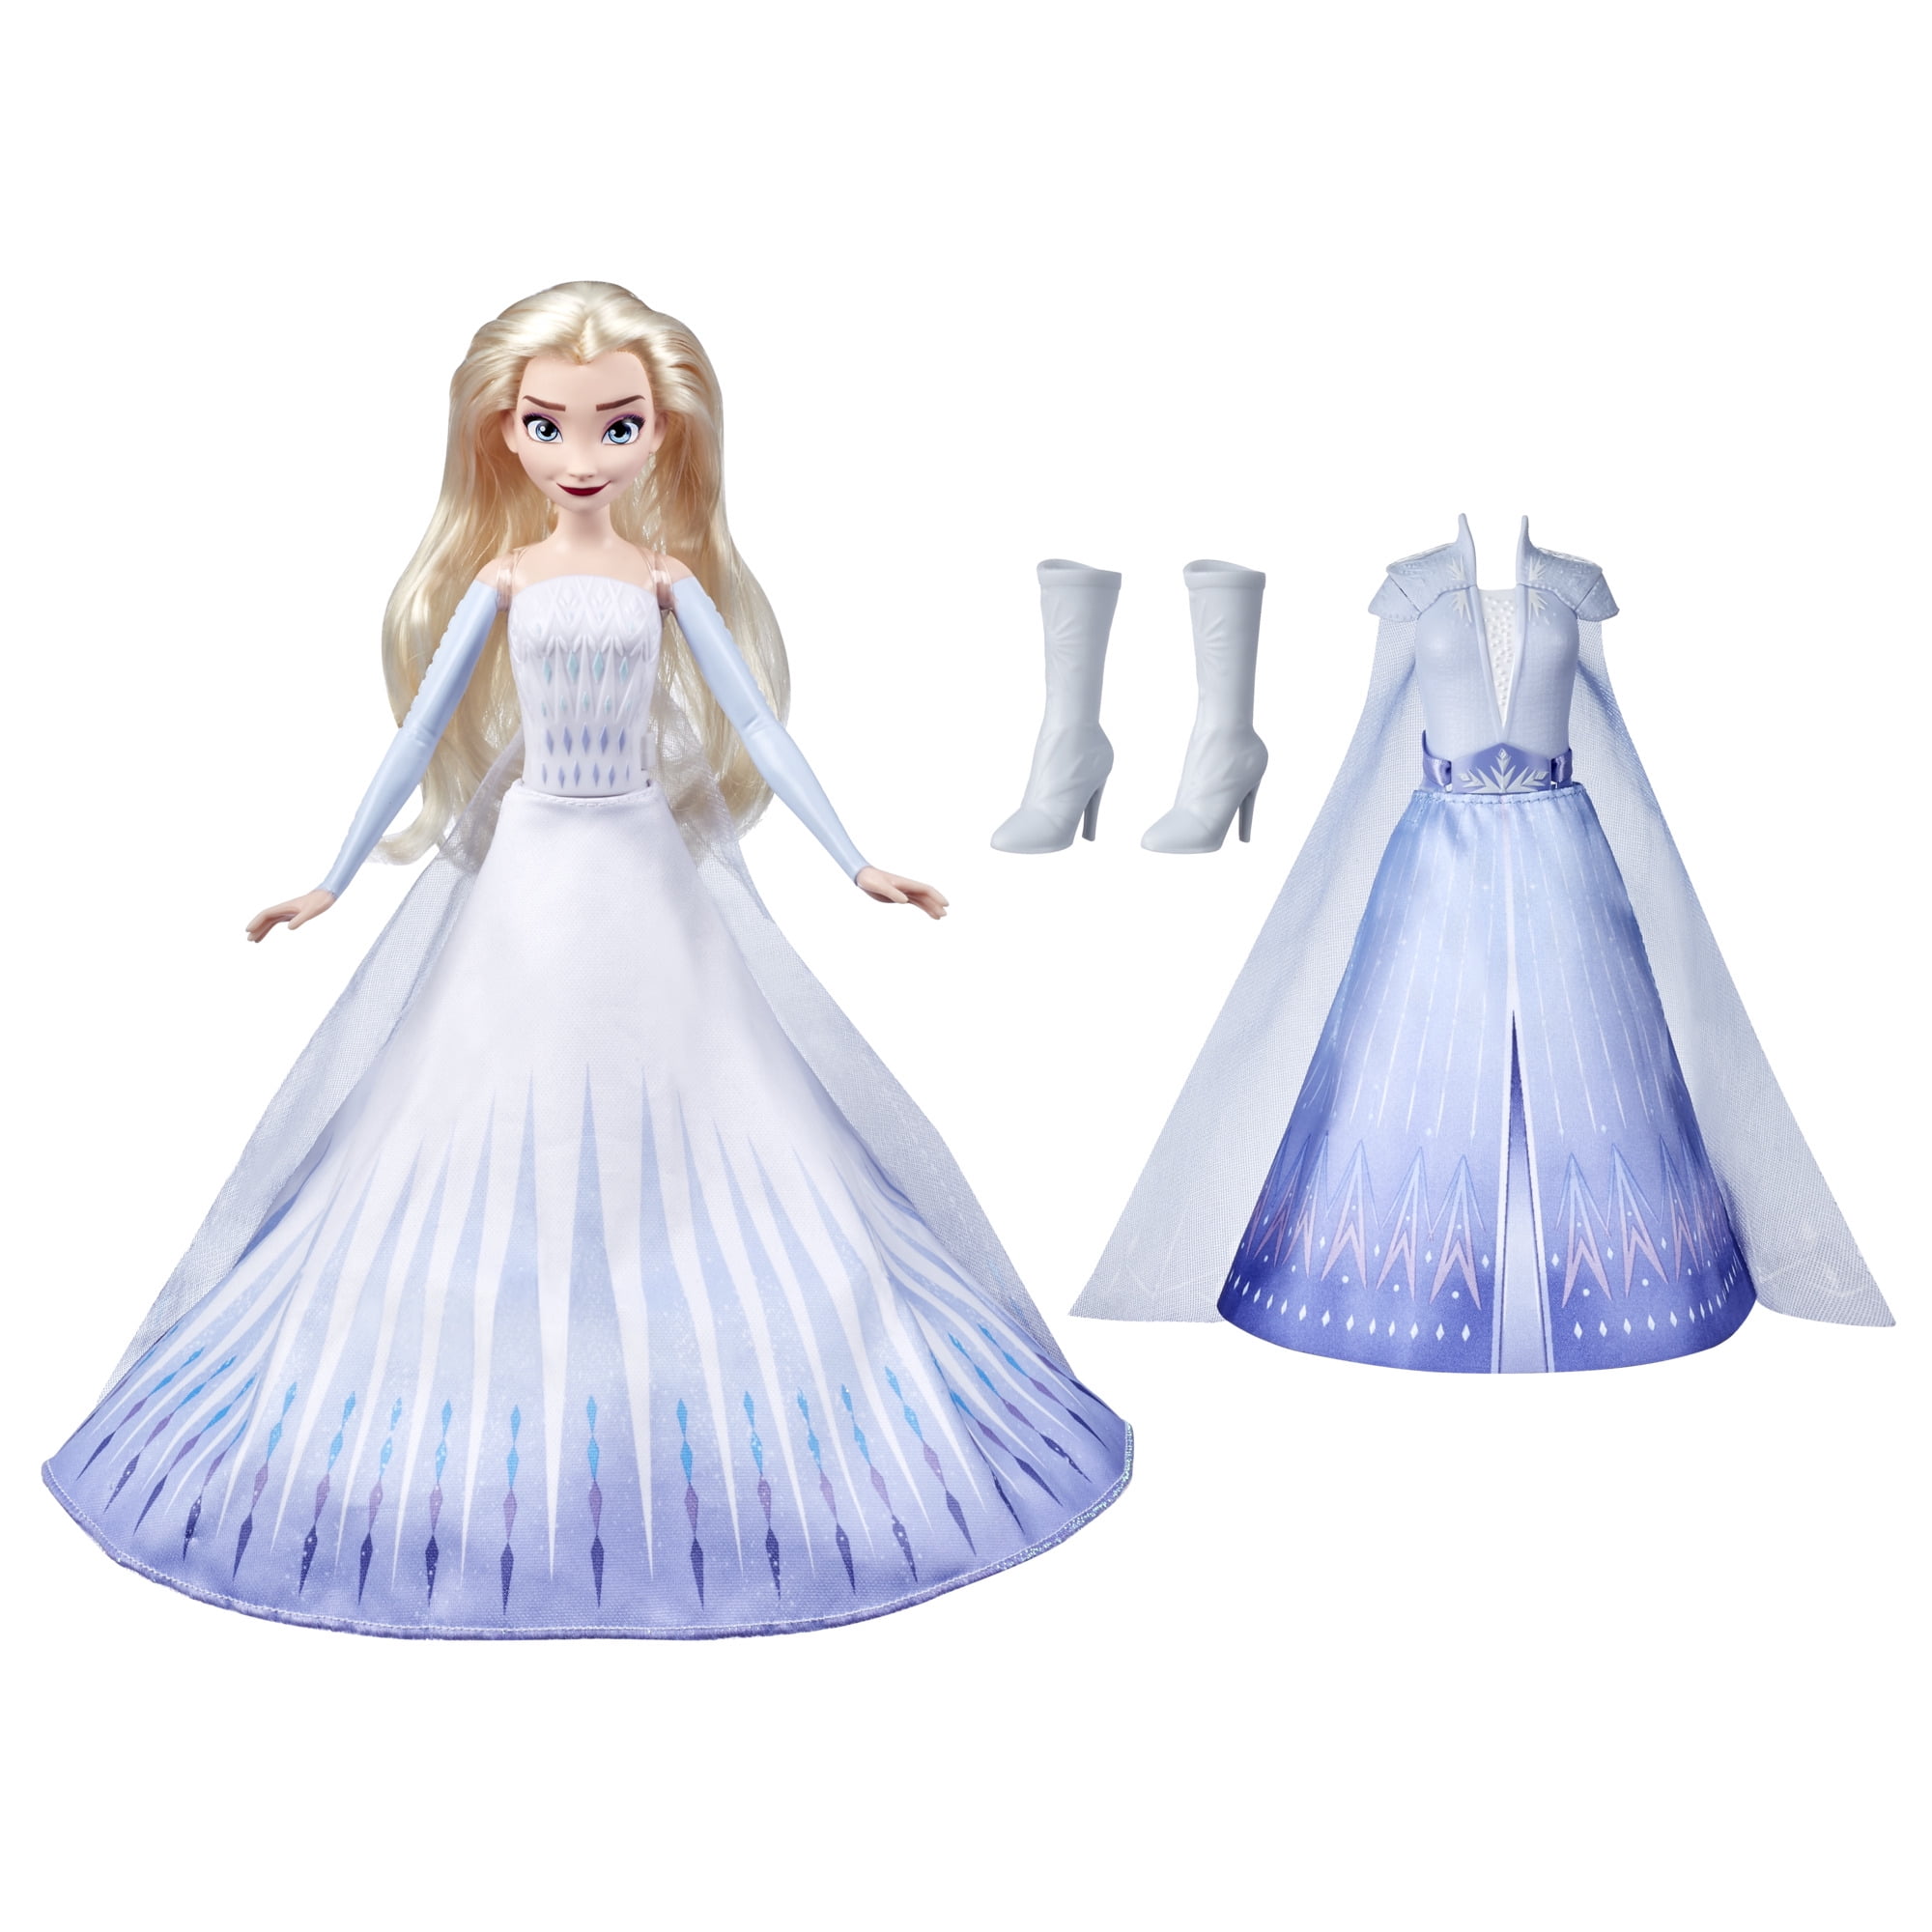 Disney Frozen Elsa Fashion Doll With Long Blonde Hair and Blue Outfit Inspired 2 